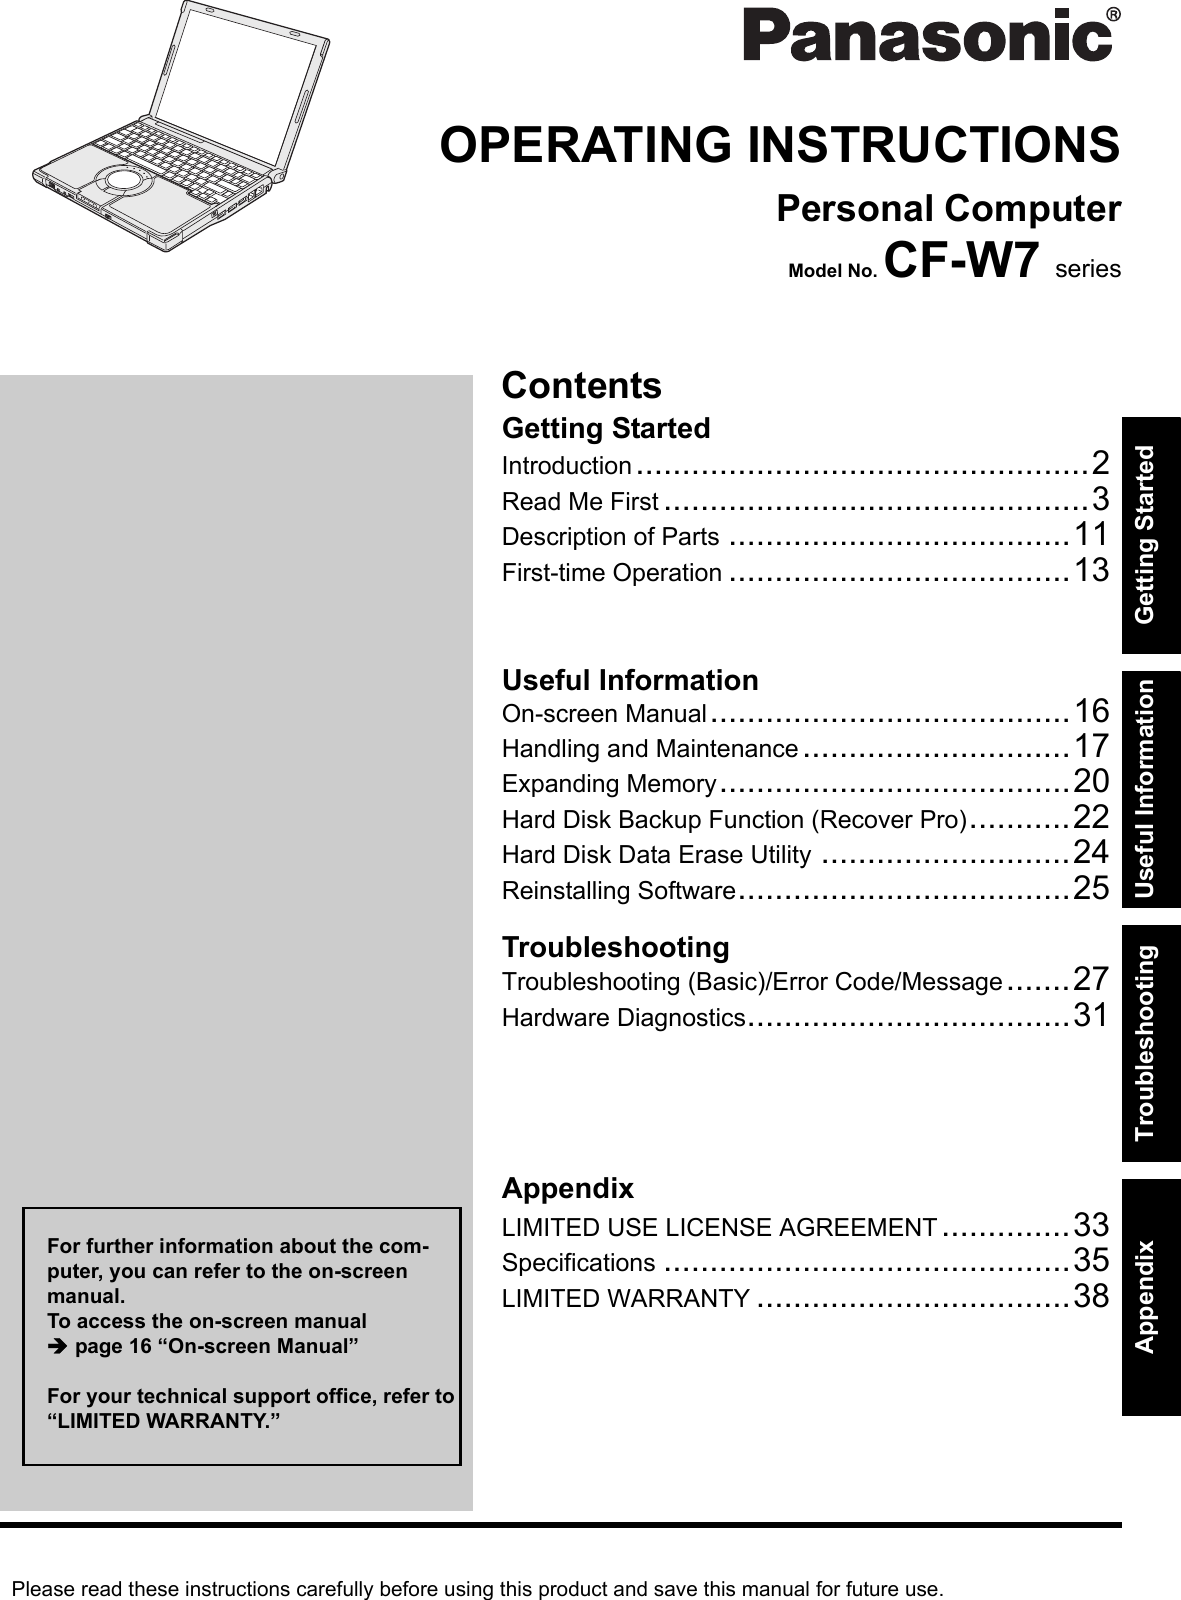 Please read these instructions carefully before using this product and save this manual for future use.ContentsGetting StartedUseful InformationTroubleshootingGetting StartedUseful InformationTroubleshootingAppendixAppendixOPERATING INSTRUCTIONSPersonal ComputerModel No. CF-W7 seriesIntroduction.................................................2Read Me First ..............................................3Description of Parts .....................................11First-time Operation .....................................13On-screen Manual.......................................16Handling and Maintenance.............................17Expanding Memory......................................20Hard Disk Backup Function (Recover Pro)...........22Hard Disk Data Erase Utility ...........................24Reinstalling Software....................................25Troubleshooting (Basic)/Error Code/Message.......27Hardware Diagnostics...................................31LIMITED USE LICENSE AGREEMENT..............33Specifications ............................................35LIMITED WARRANTY ..................................38For further information about the com-puter, you can refer to the on-screen manual.To access the on-screen manual page 16 “On-screen Manual”For your technical support office, refer to “LIMITED WARRANTY.”